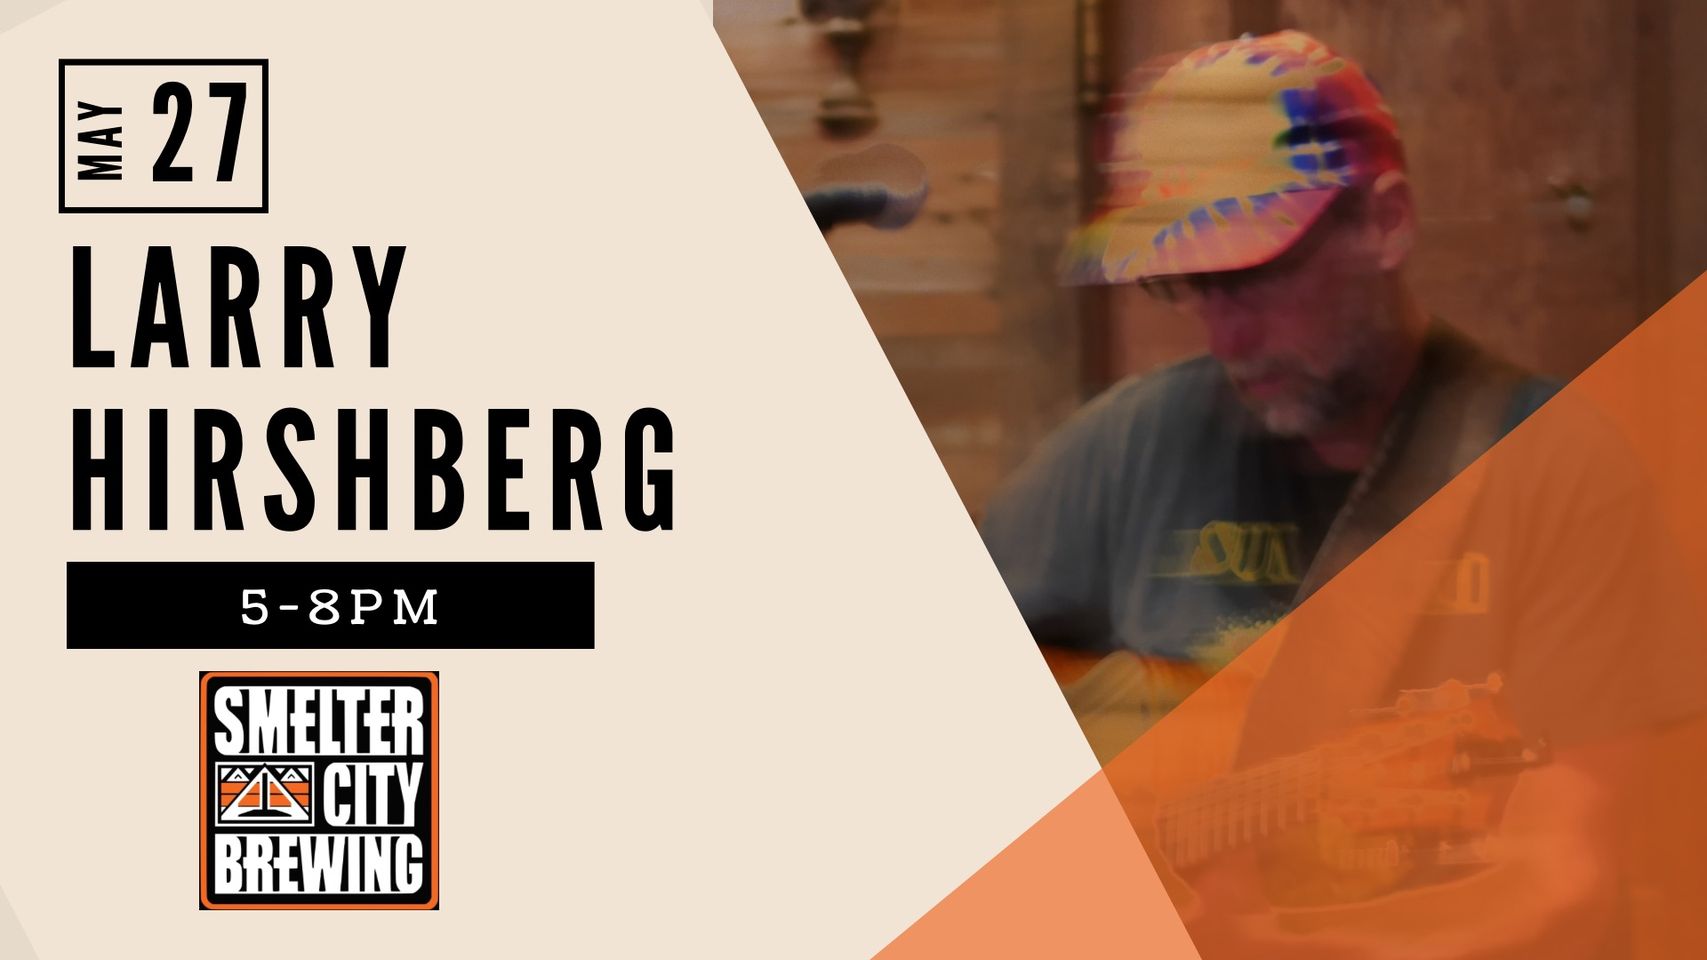 Larry Hirshberg live at Smelter City Brewing in Anaconda, Montana from 5:00 pm to 8:00 pm on Saturday, May 27, 2023 